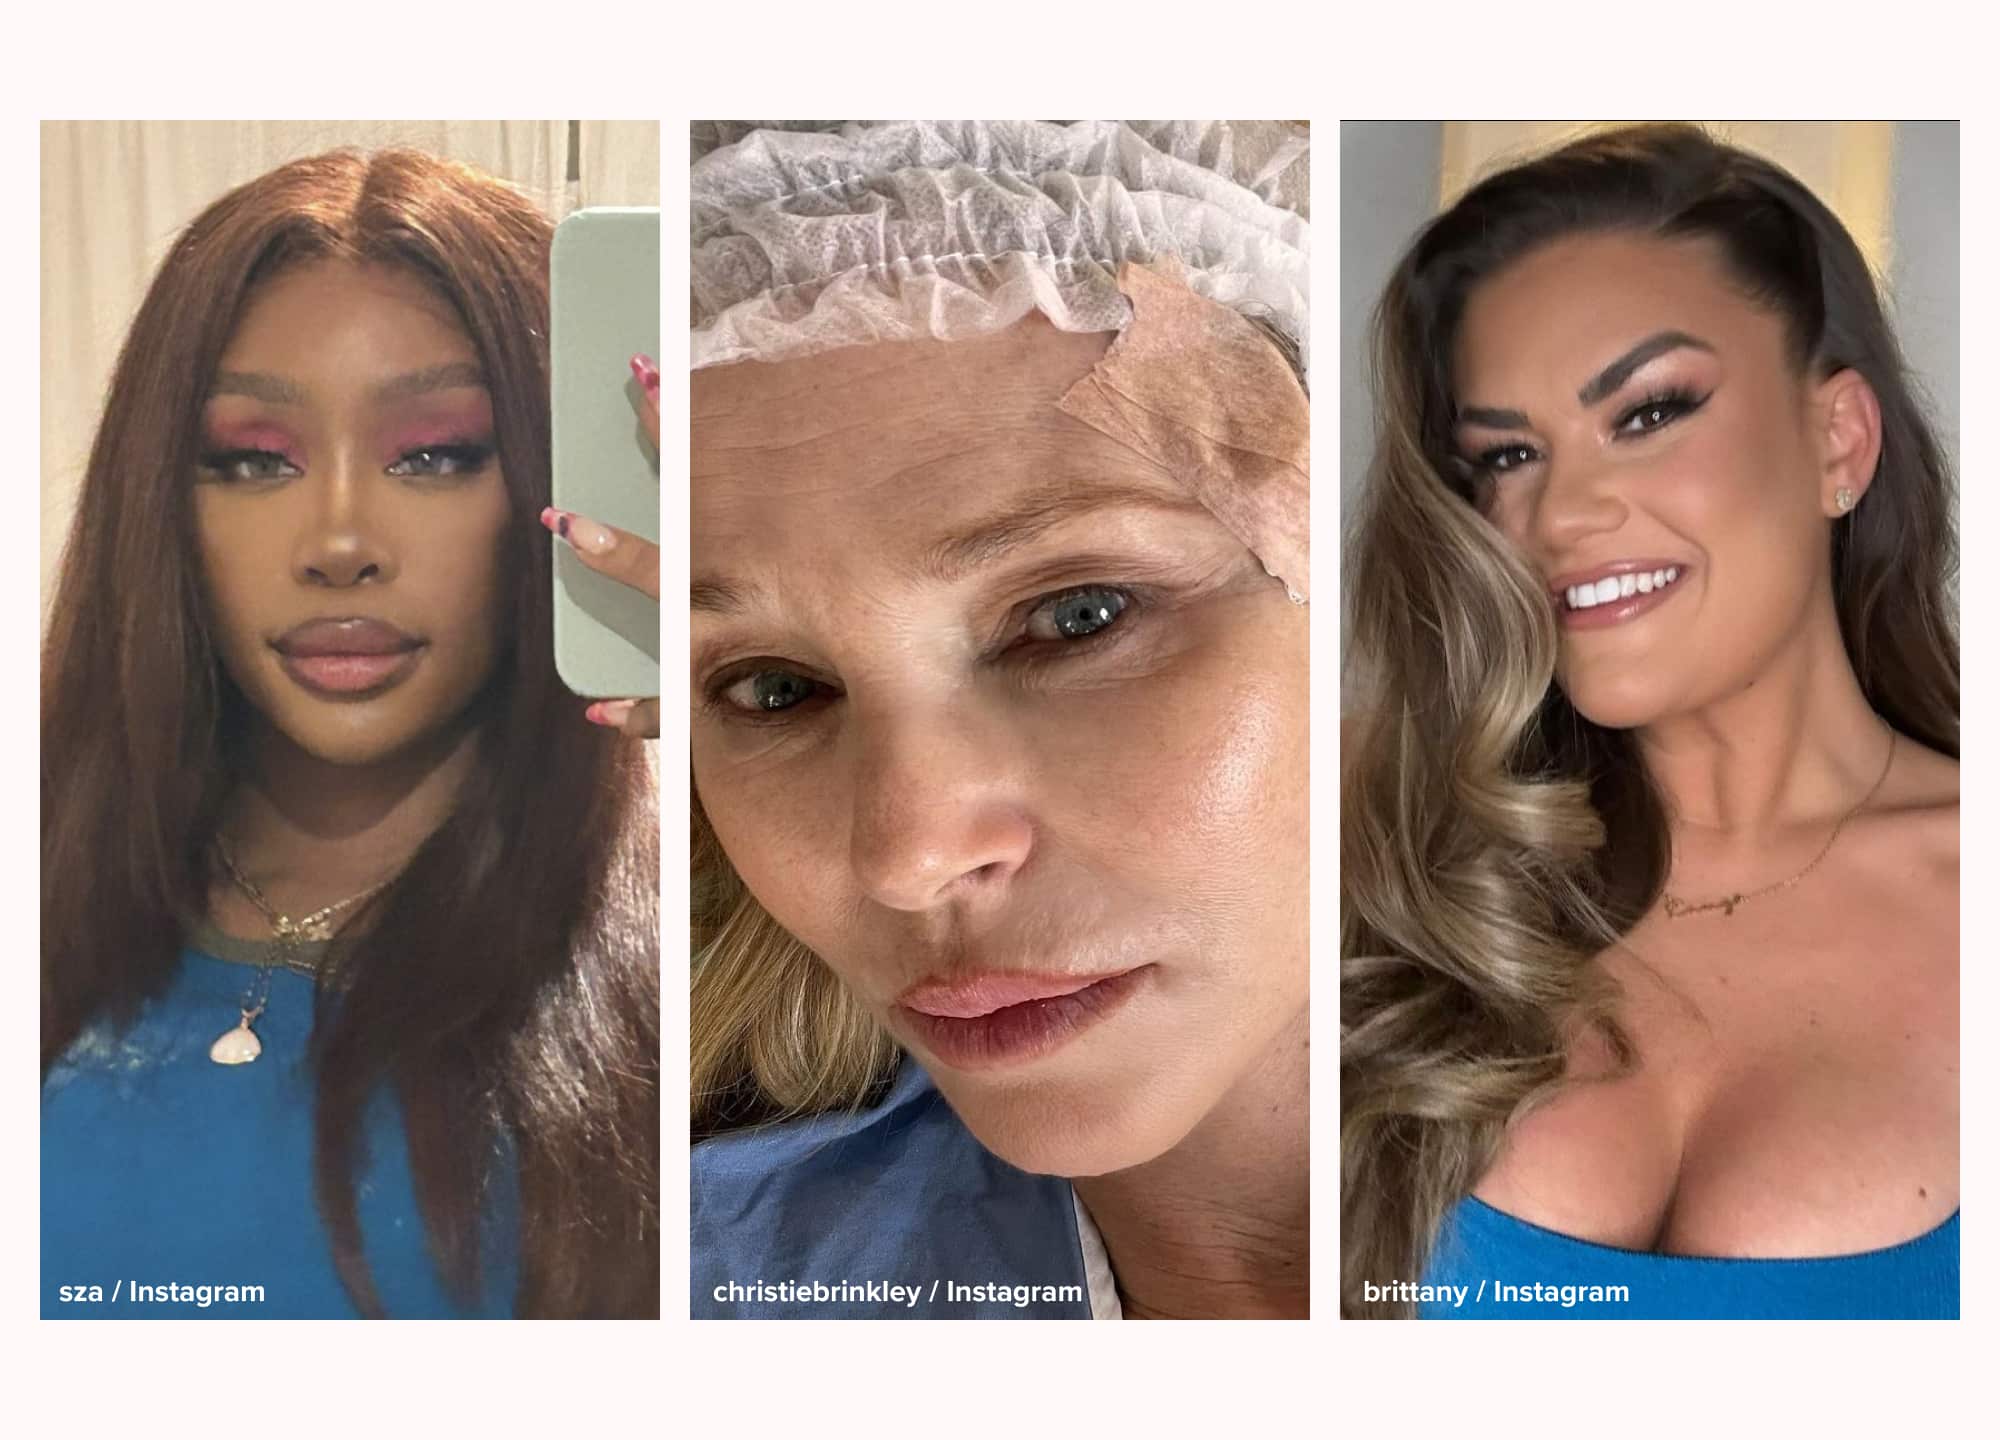 This Month in Aesthetics: SZA Removes Her Breast Implants, Filler Gets a New FDA Approval, Christie Brinkley's Surgery, and More - article image